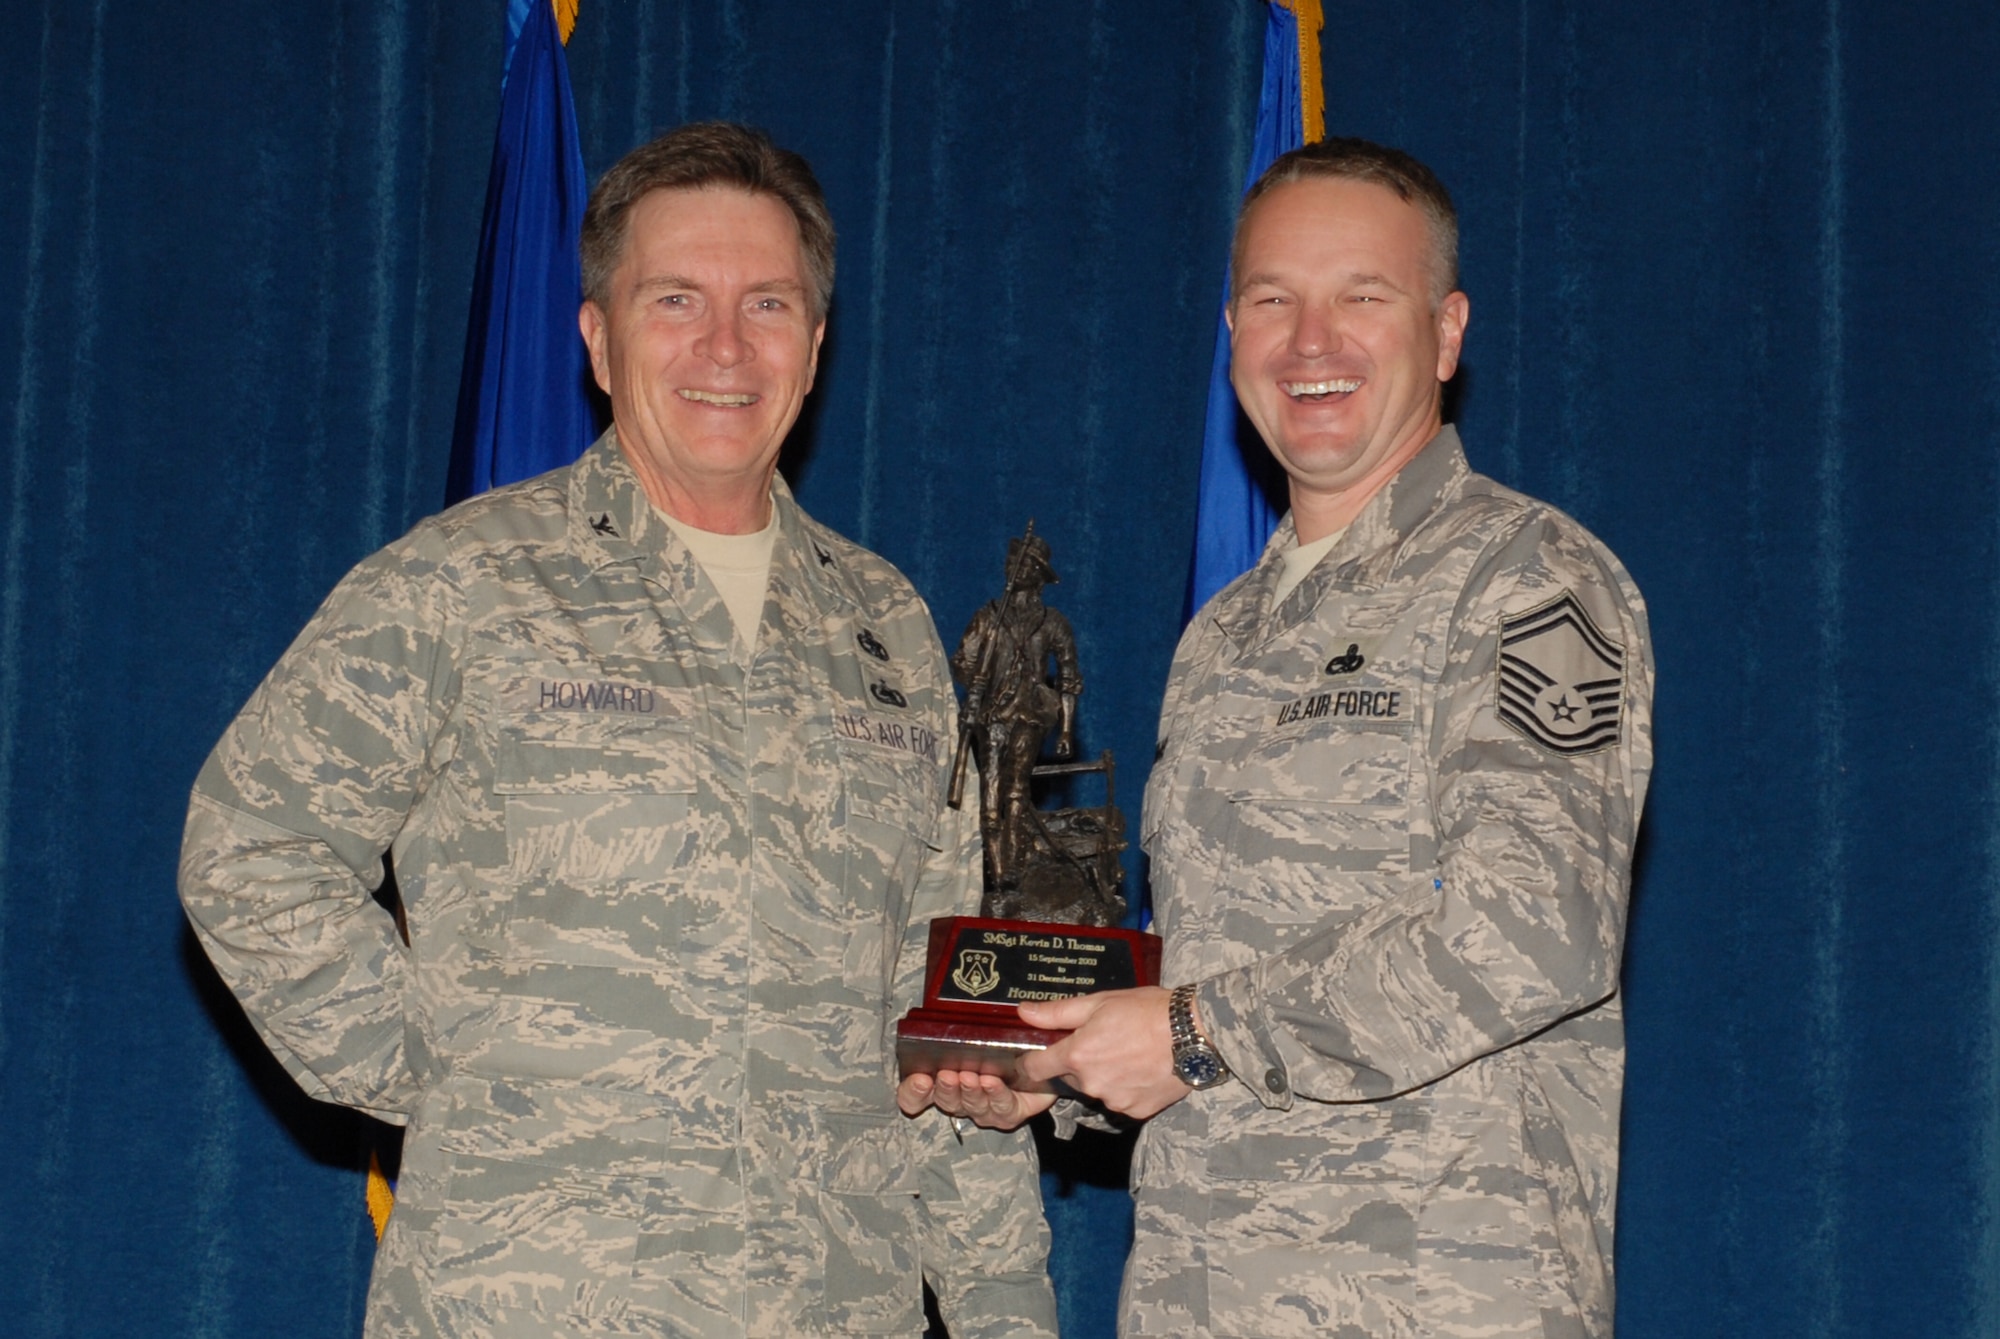 McGHEE TYSON AIR NATIONAL GUARD BASE, Tenn. -- Senior Master Sgt. Kevin Thomas, right, the director of resources for enlisted professional military education, receives the honorary faculty award from Col. Richard B. Howard, commander, upon his departure from assignment at The I.G. Brown Air National Guard Training and Education Center here, Dec. 18, 2009.  (U.S. Air Force photograph by Master Sgt. Mavi Smith/Released)